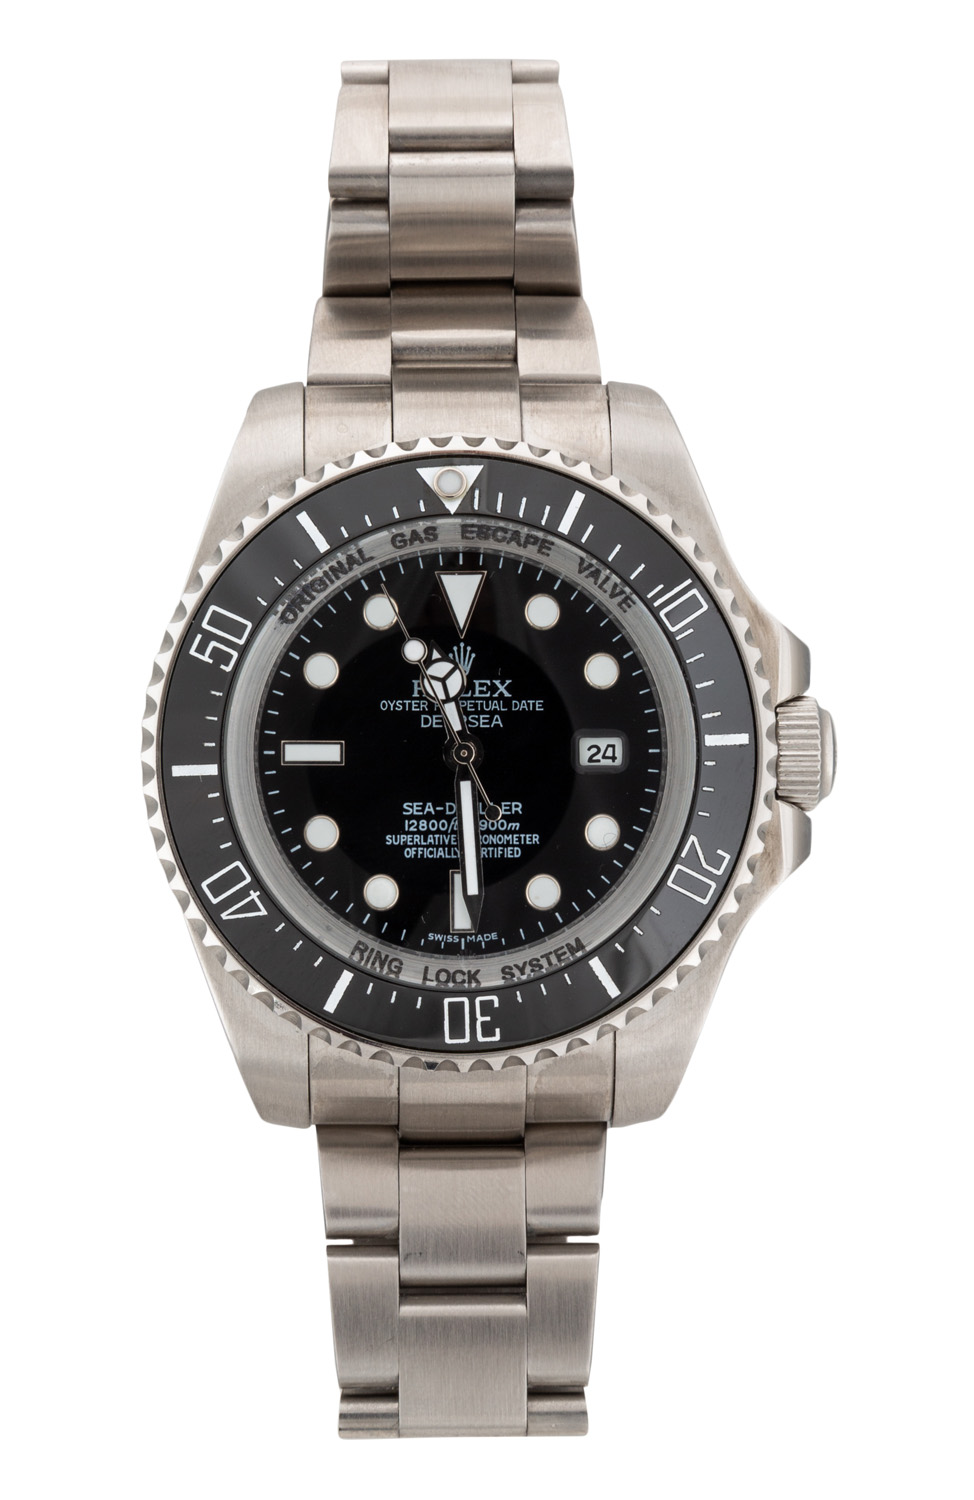 ROLEX OYSTER PERPETUAL DEEPSEA DWELLER STAINLESS STEEL AUTOMATIC CENTER WRISTWATCH WITH HELIUM ESCAPE VALVE, DATE GLIDELOCK | Shapiro Auctions